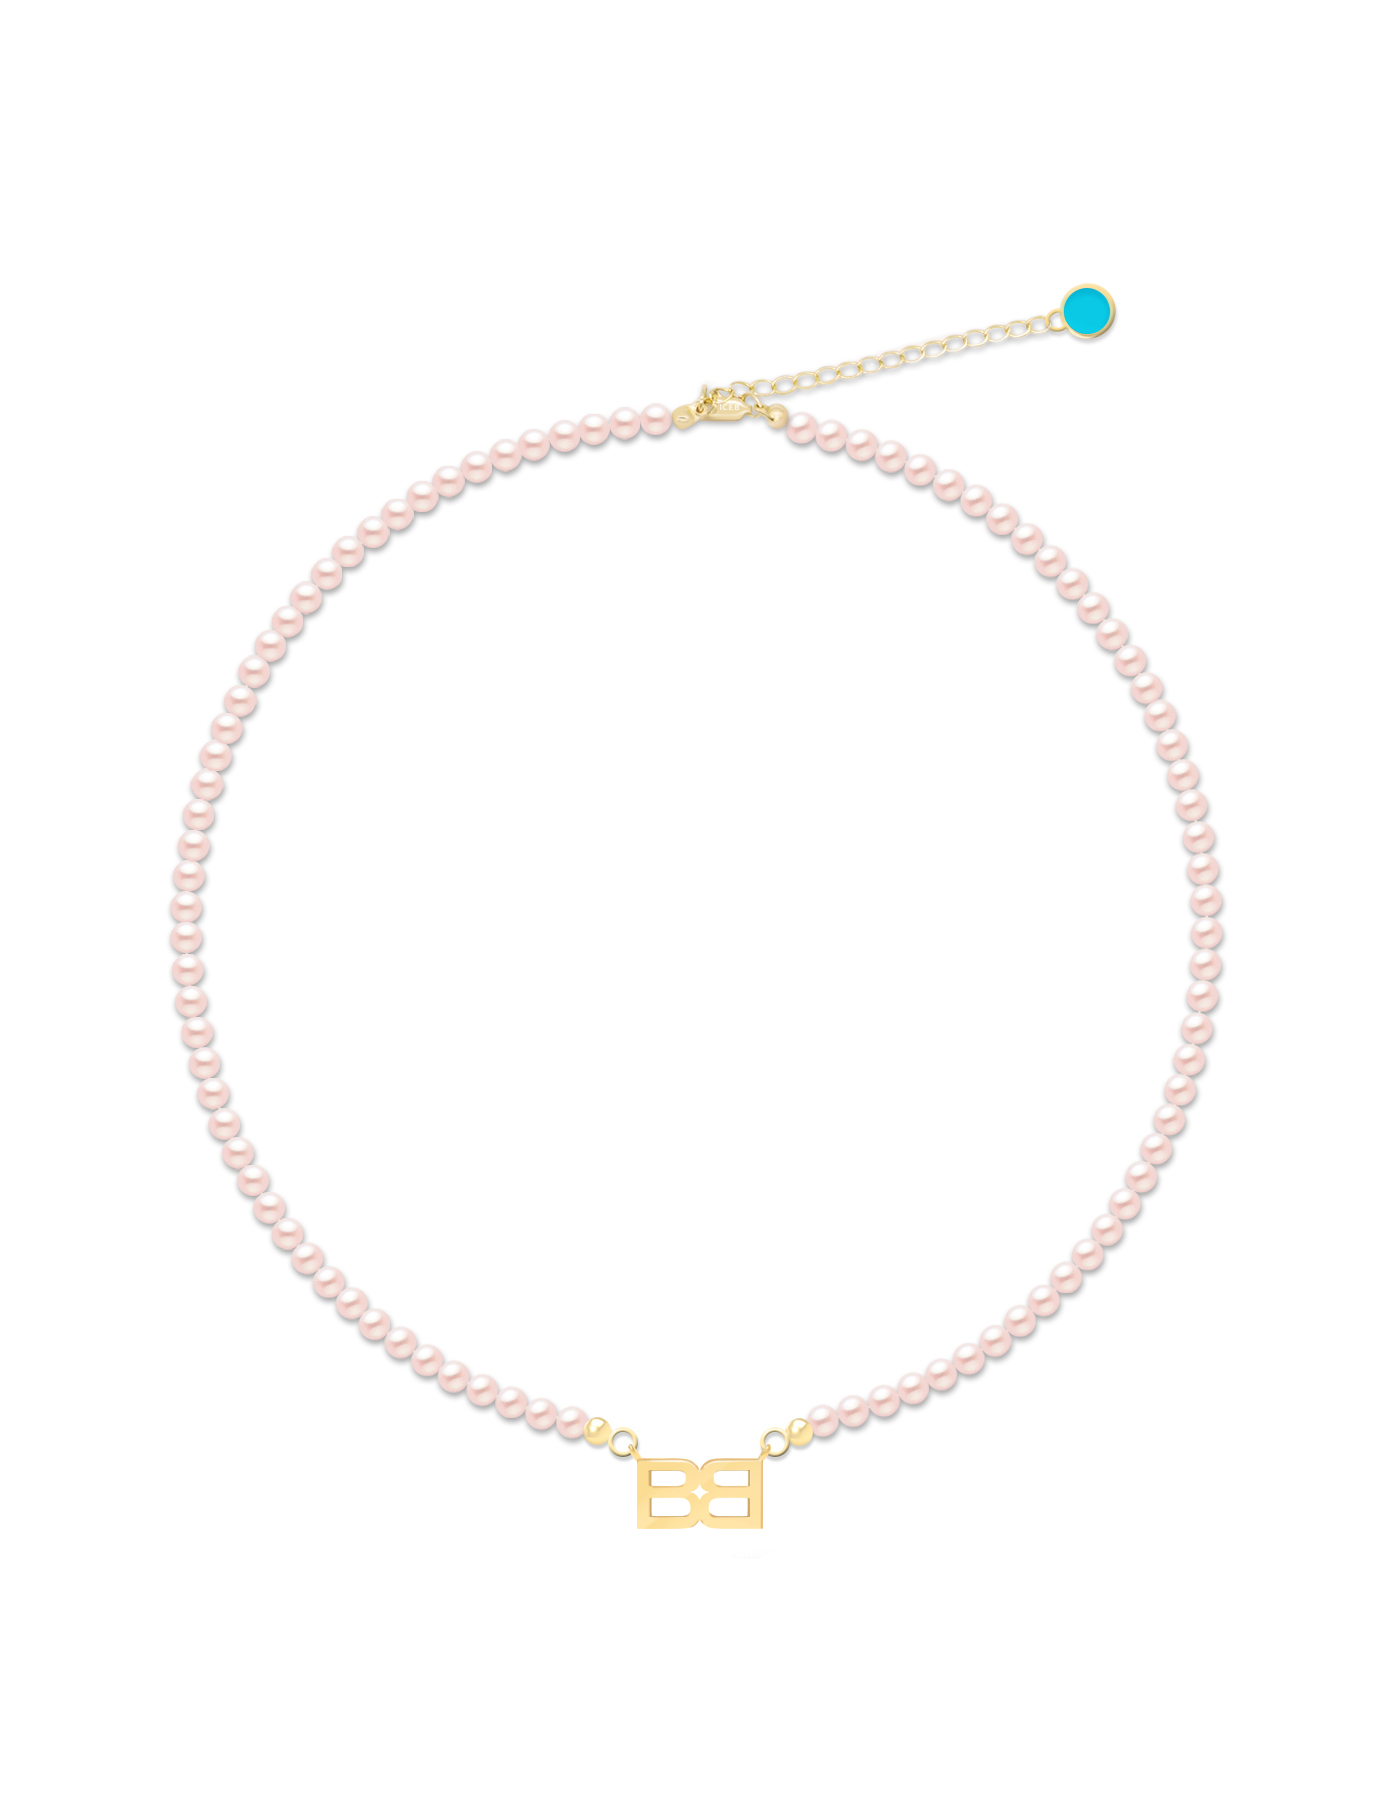 BB pearl necklace (Pink)